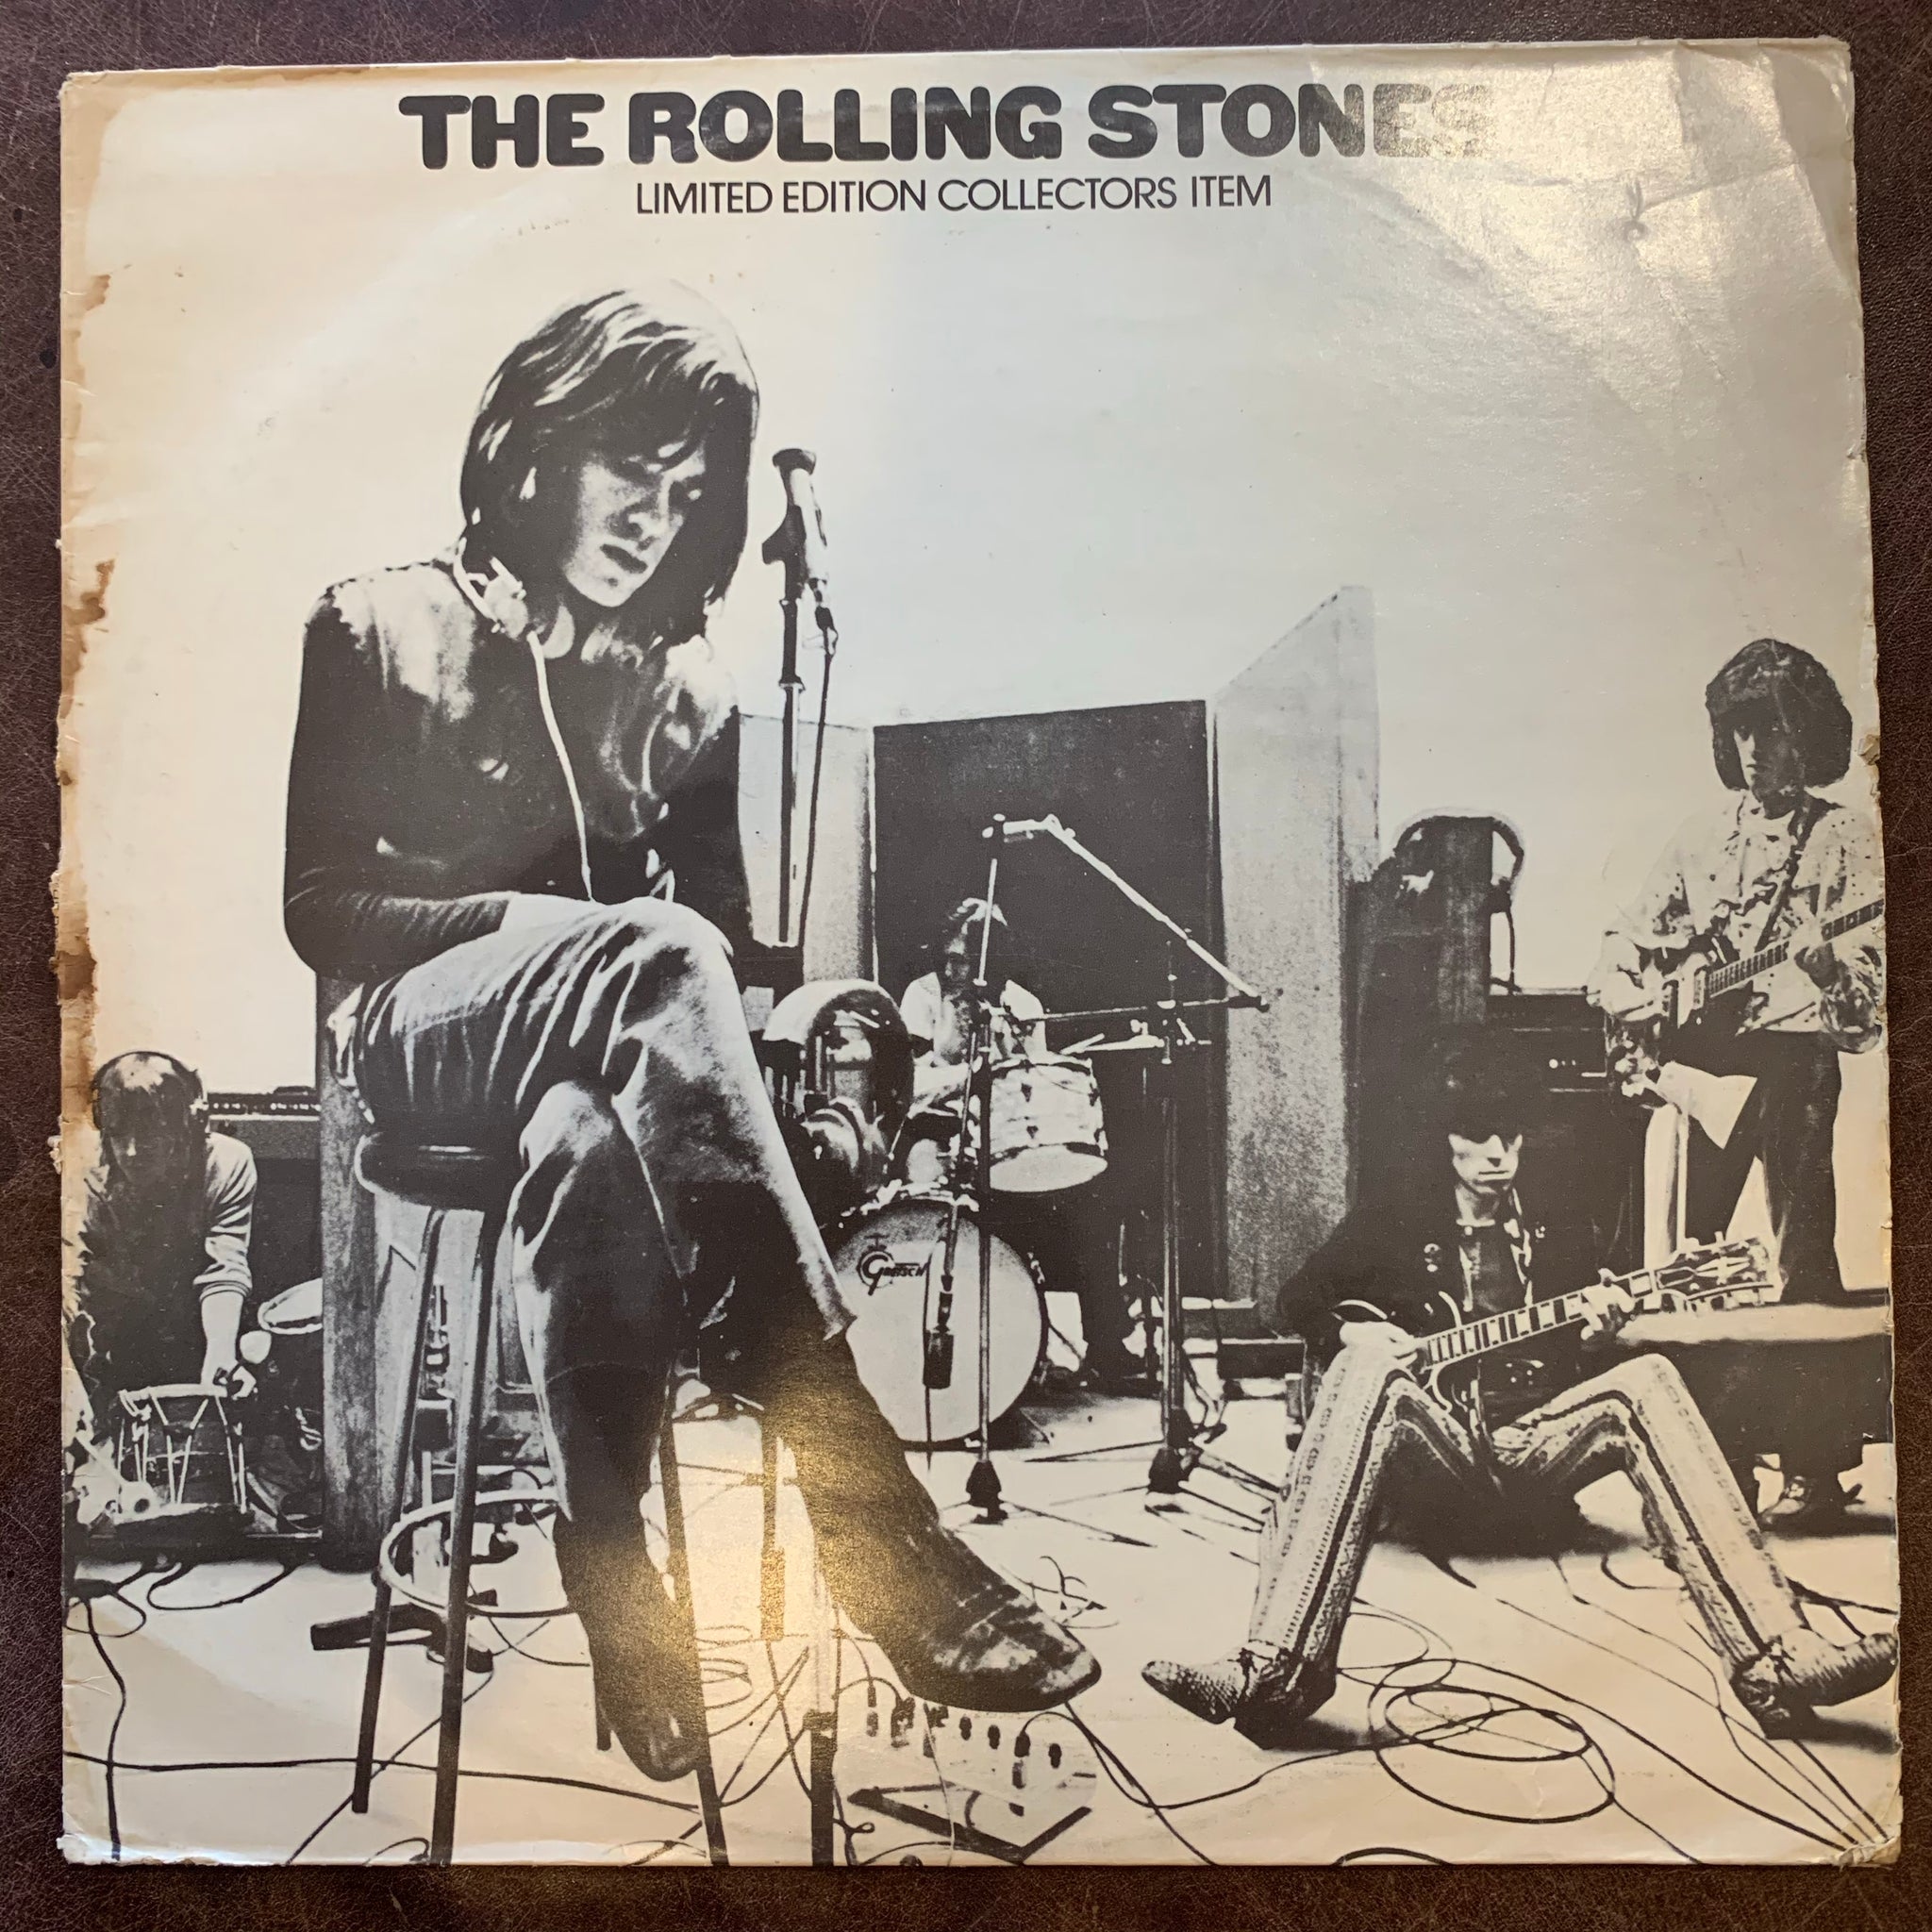 The Rolling Stones - Limited Edition Collectors Item